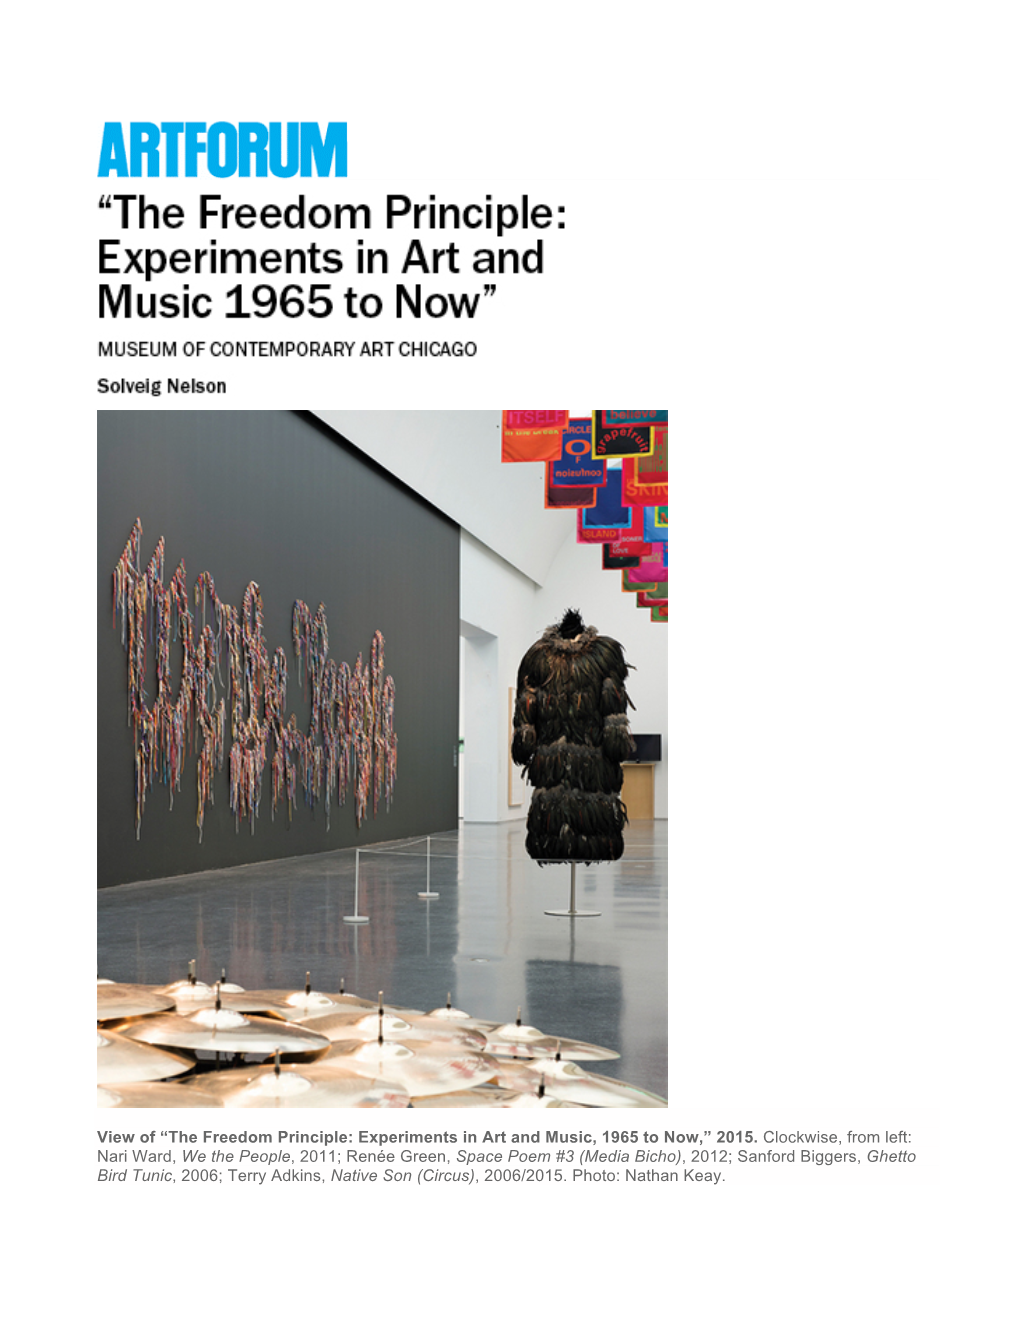 The Freedom Principle: Experiments in Art and Music, 1965 to Now,” 2015